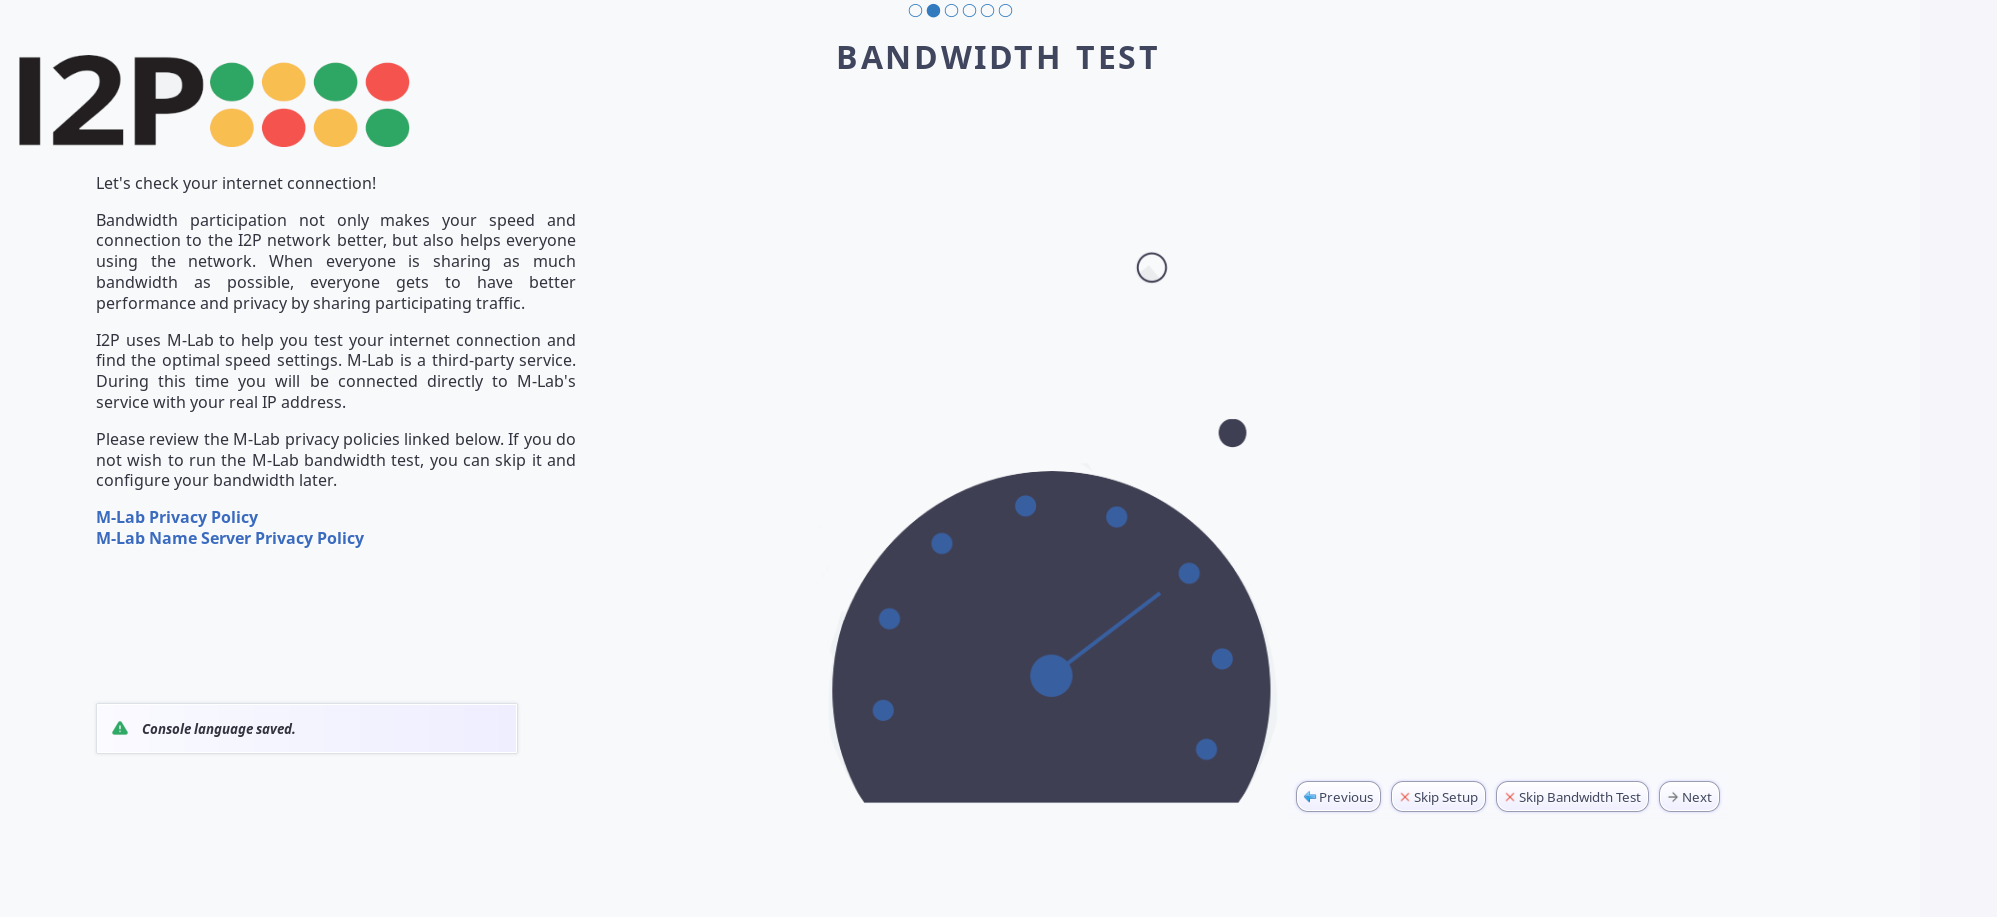 Let the participant know what the bandwidth test entails